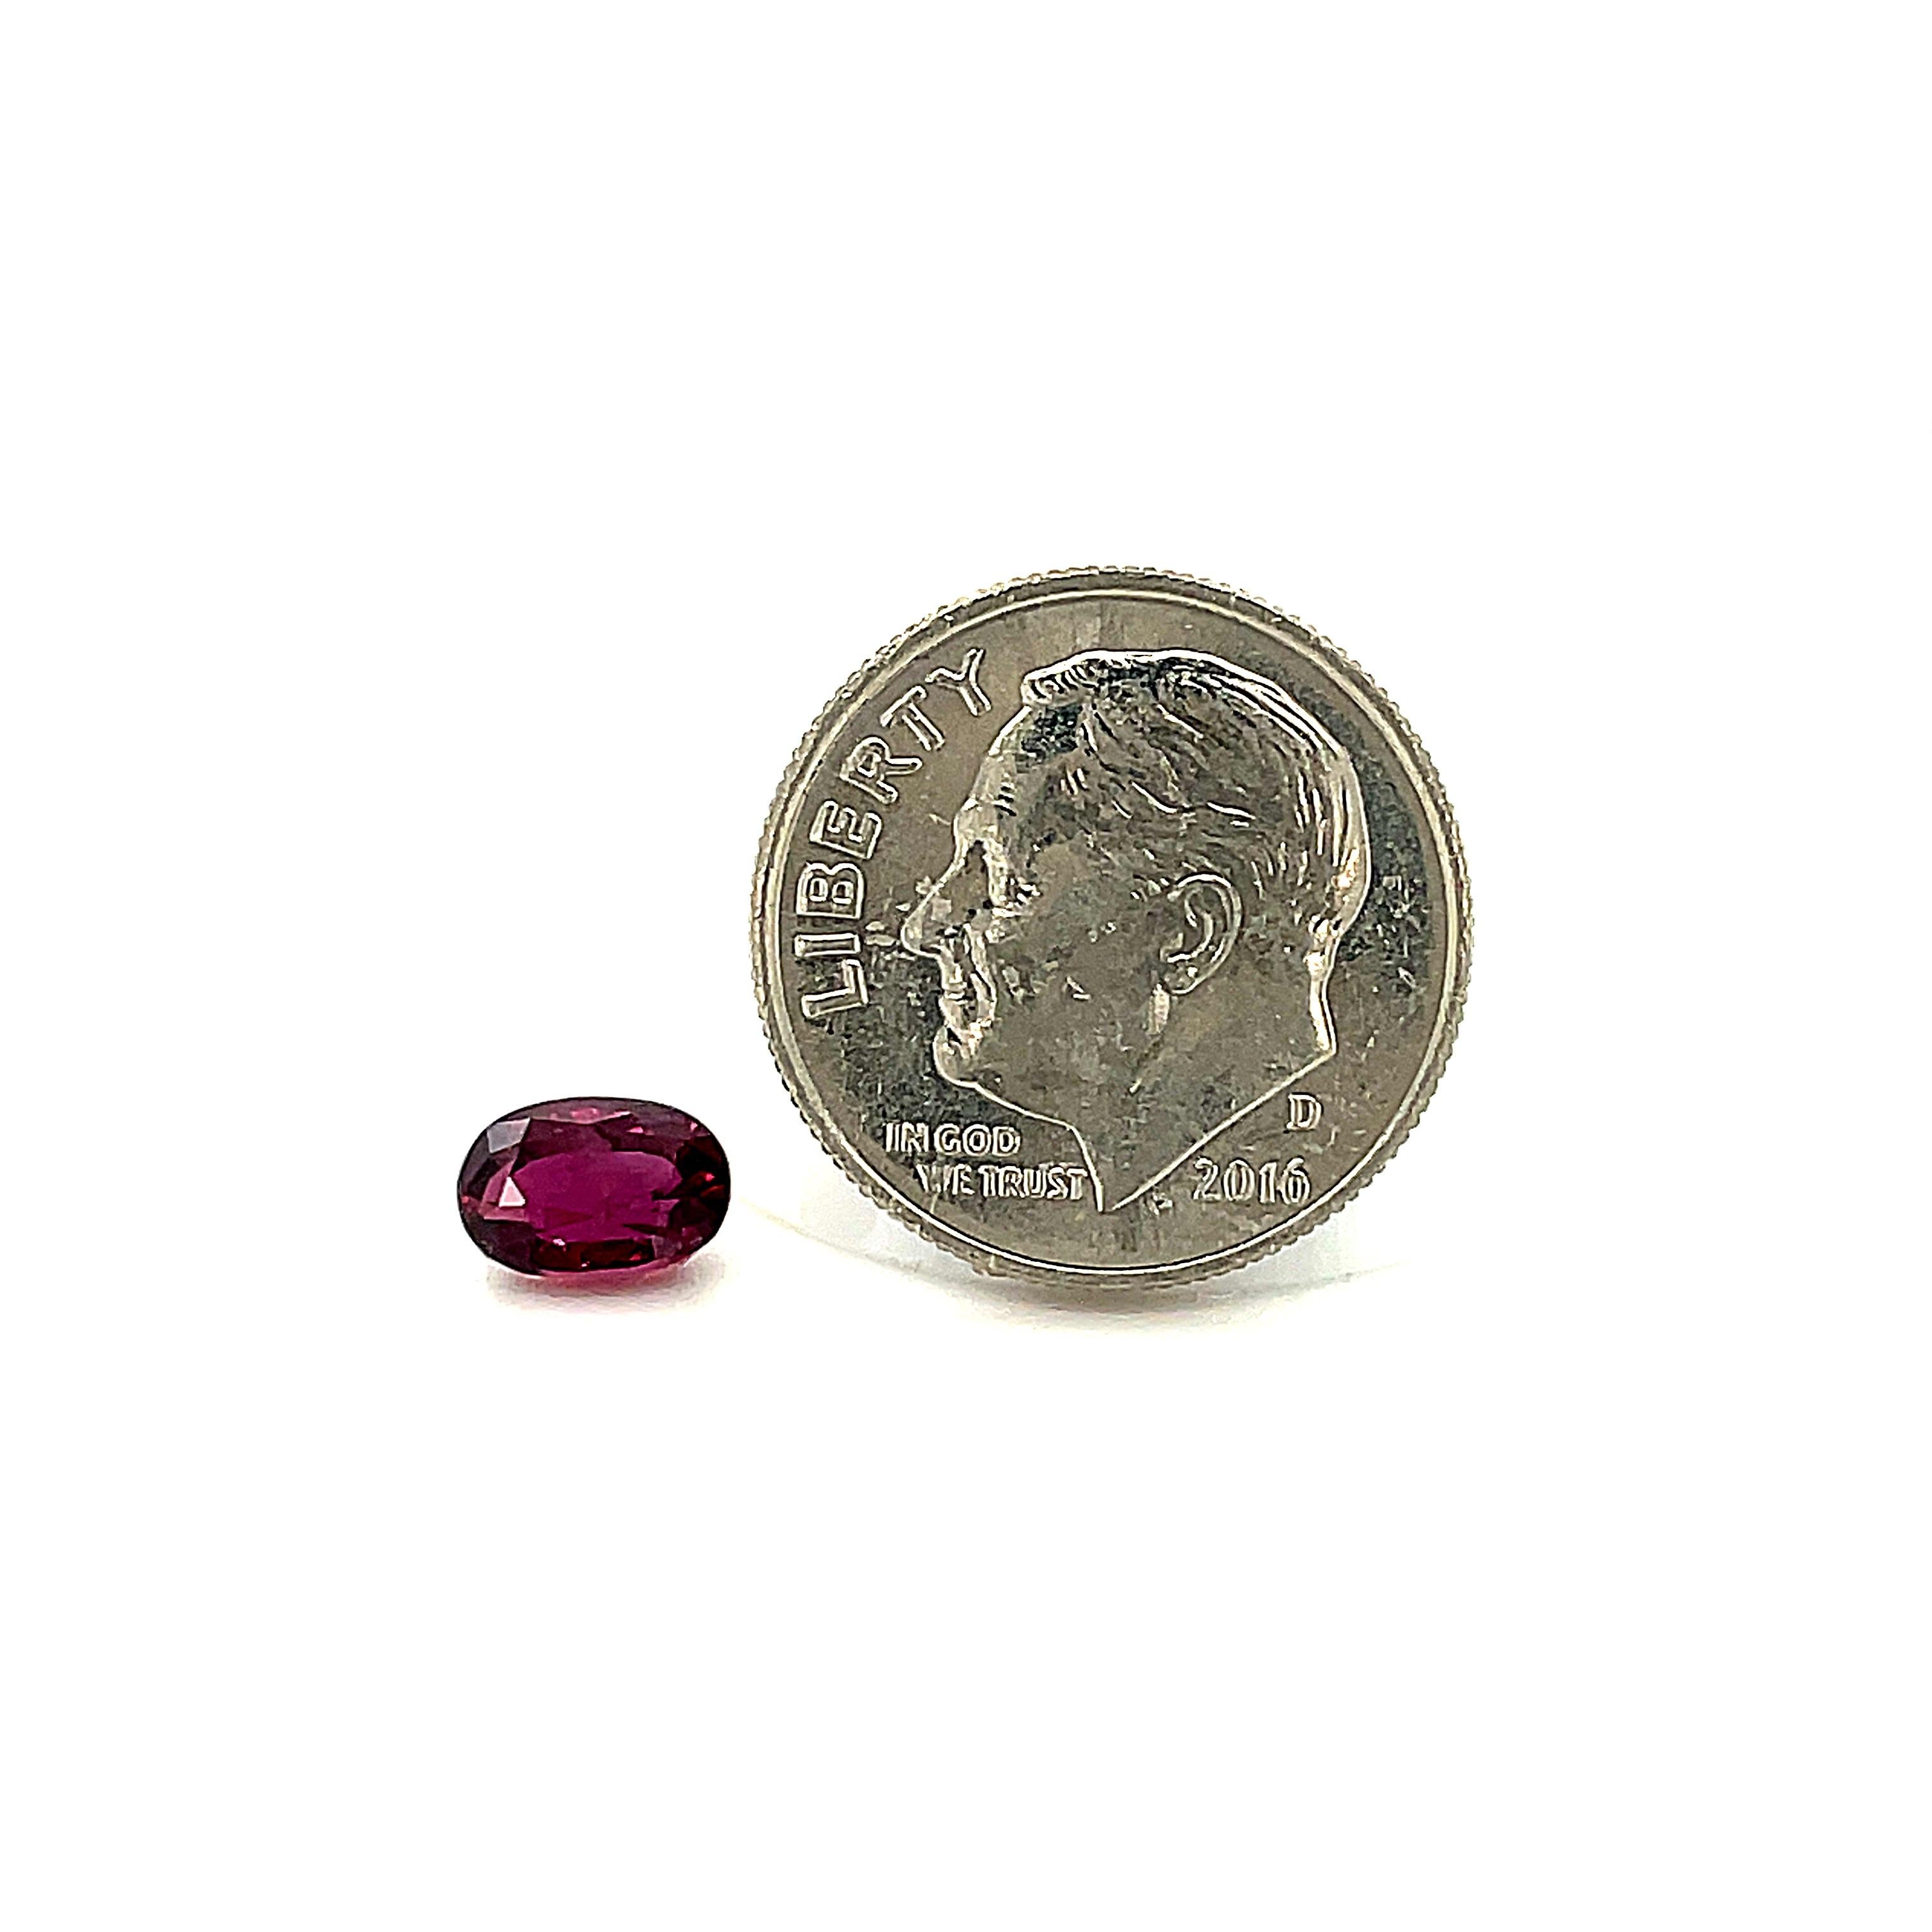 1.24 Carat Oval Loose Unset Ruby Gemstone For Sale 2